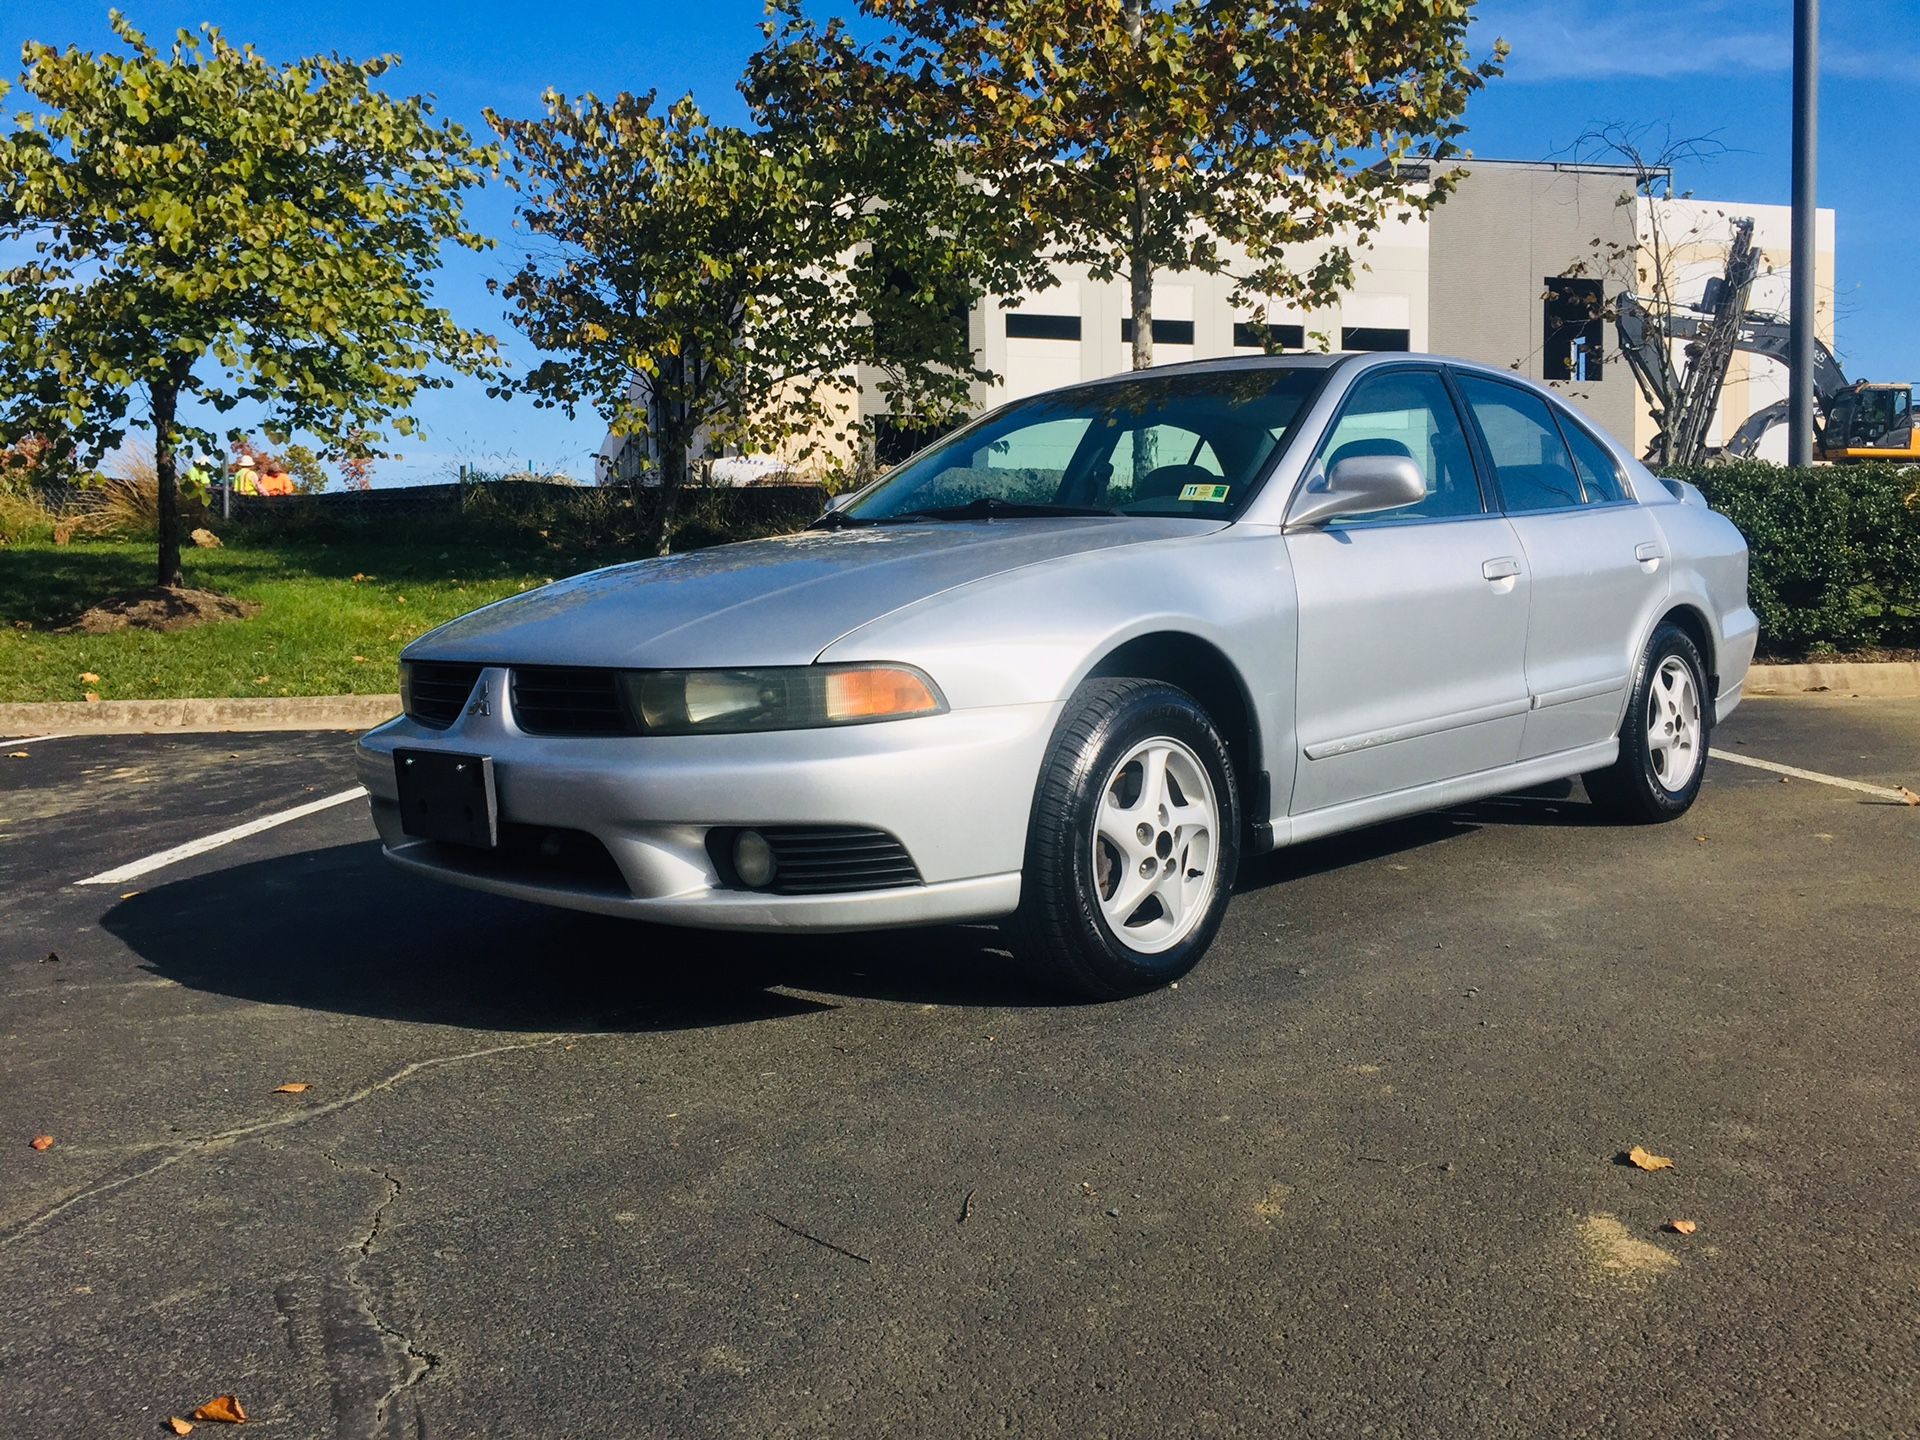 2003 Mitsubishi Galant 4 cyl has 130xxx miles runs very smooth very clean in and out cold AC has cd fm am all power window sunroof doors locks New